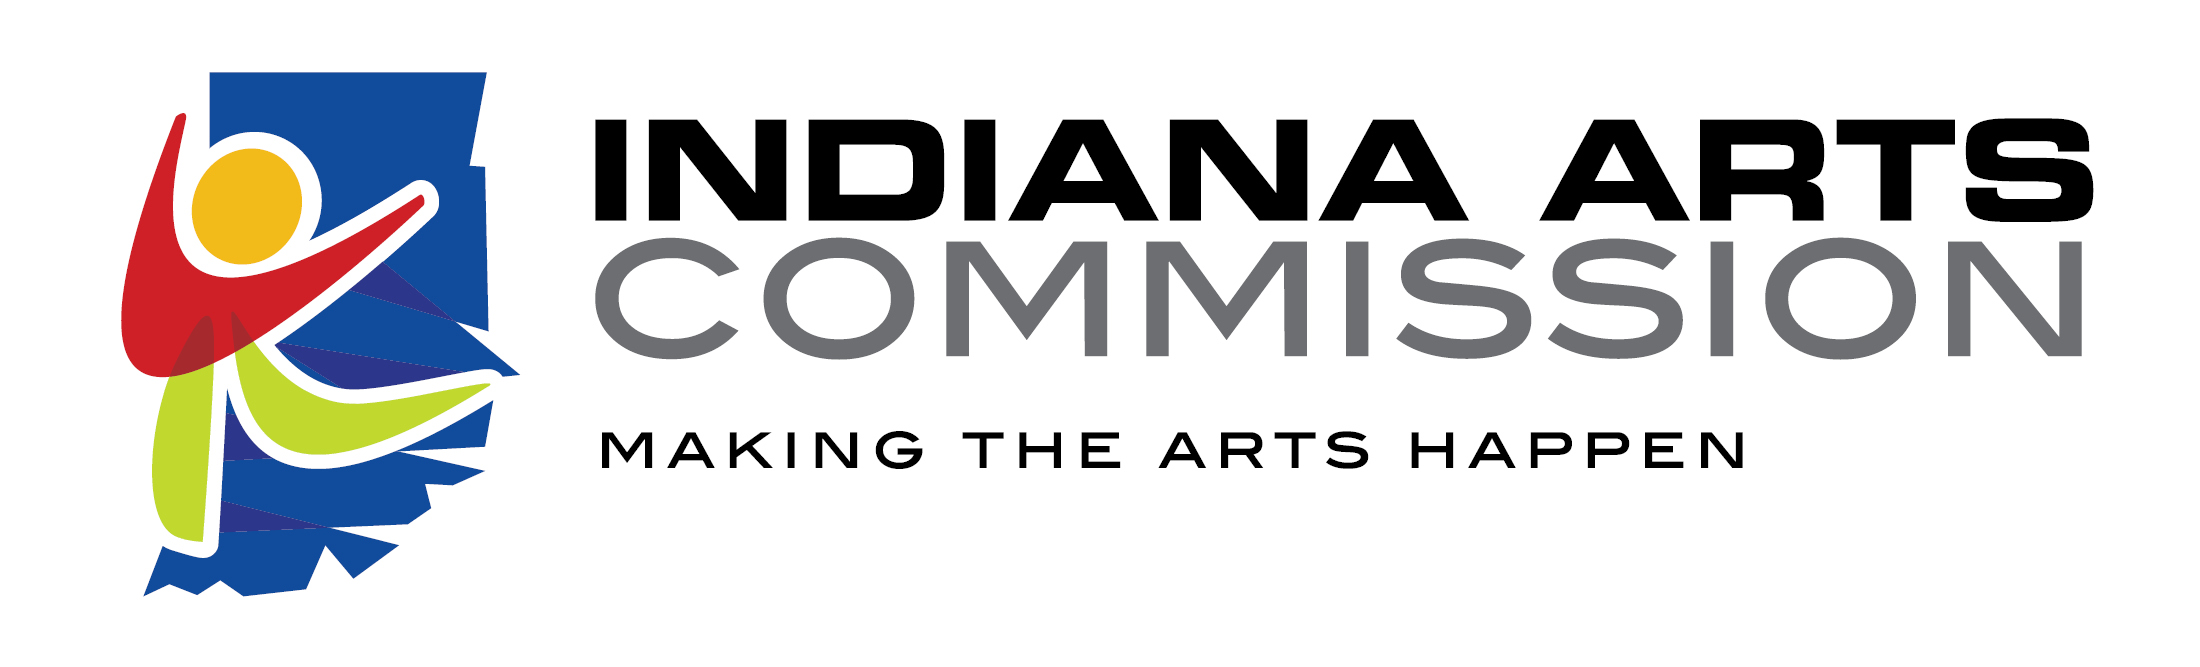 Indiana Arts Commission logo, with text saying Making the Arts Happen